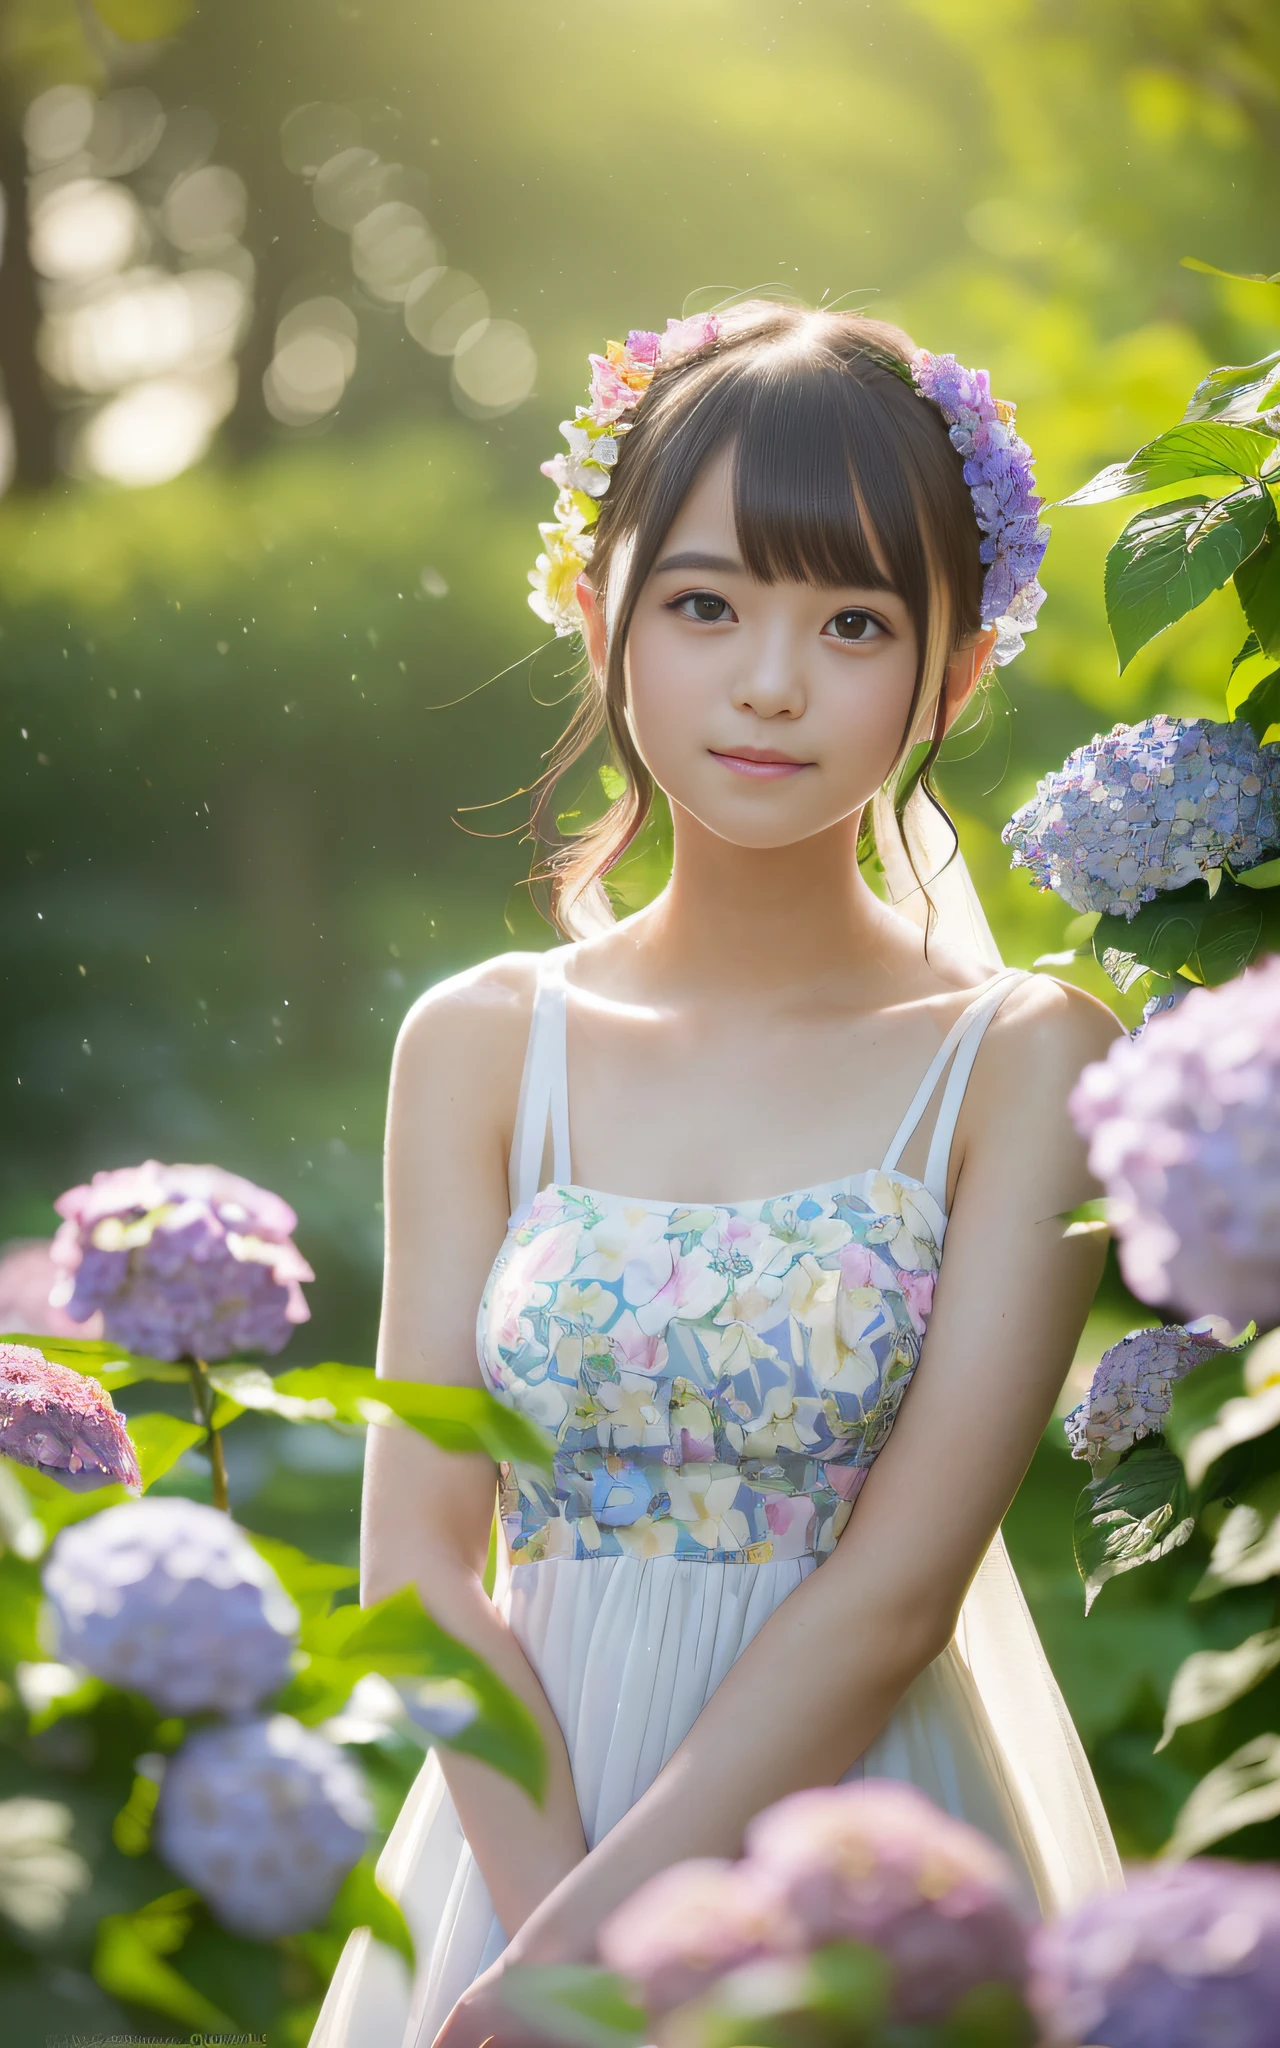 20 years old, twilight rays, wedding dress, corolla, (((Tokugawaen)), hydrangea front bokeh, bokeh, photorealistic, surrounded by hydrangeas, background dark, smiling, (one girl), (sunset: 1.3), (8k, raw photography, best quality, masterpiece: 1.2), (realistic, photorealism: 1.37), best quality, ultra high resolution, (focus plane: 1.8), ( Portrait: 1.7), (Intense:1.1), (Details:1.1), (Highest Quality), (Analog:1.2), (High Sharp), Canon EOS R Photography, (Summer Dress:1.4), (Standing in a Flower Garden:1.3), (Vivid and Colorful:1.3)